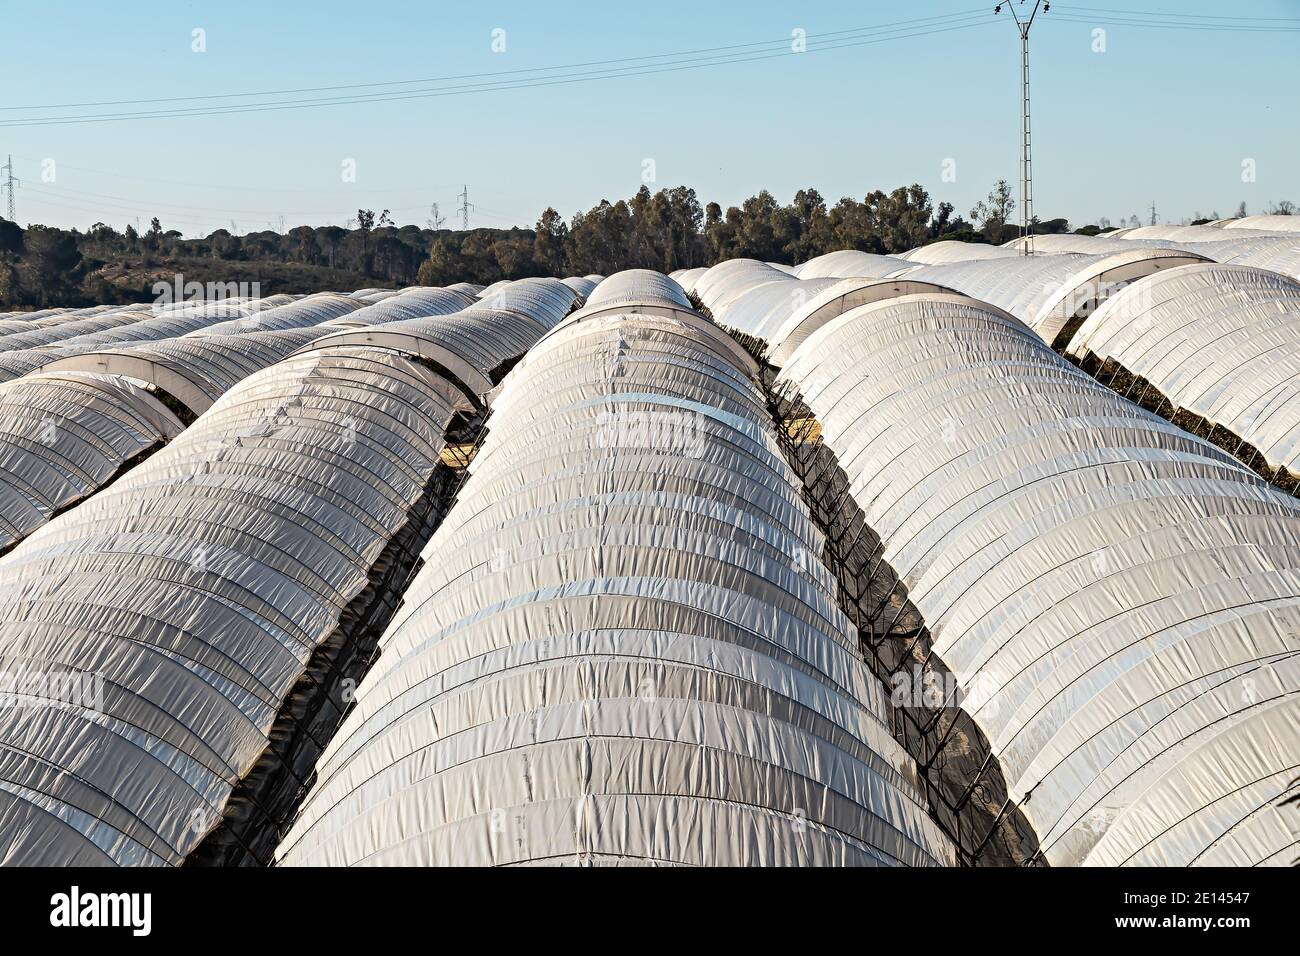 Intensive cultivation field with plastic-covered crops. Full of greenhouses cultivation Stock Photo